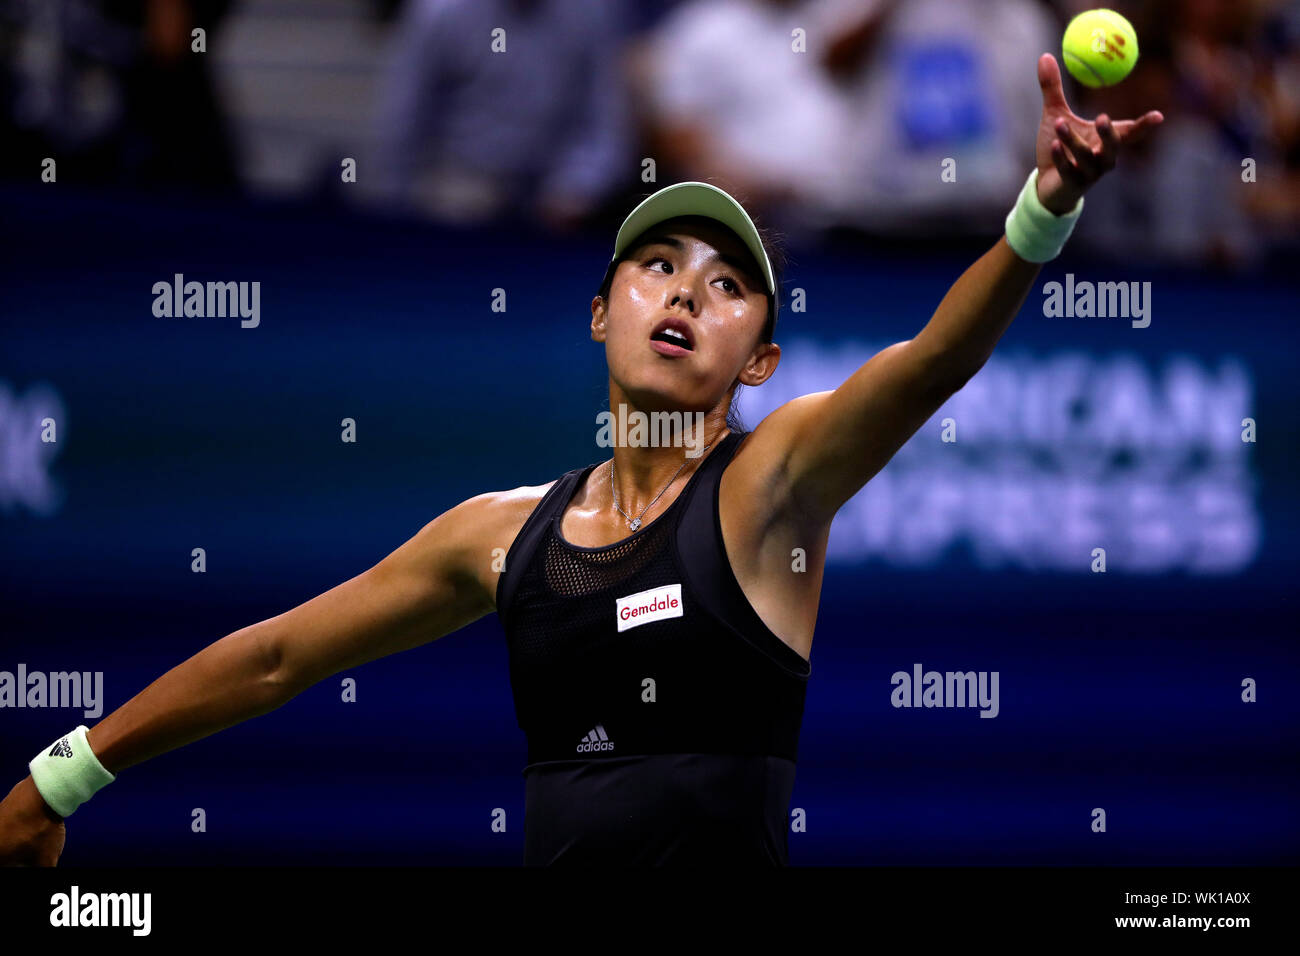 Flushing Meadows, New York, United States - 3 September 2019. Wang Qiang of China serving during her quarter final match against Serena Williams at the US Open in Flushing Meadows, New York.   Williams won the match to record her 100th US Open match victory. Credit: Adam Stoltman/Alamy Live News Stock Photo